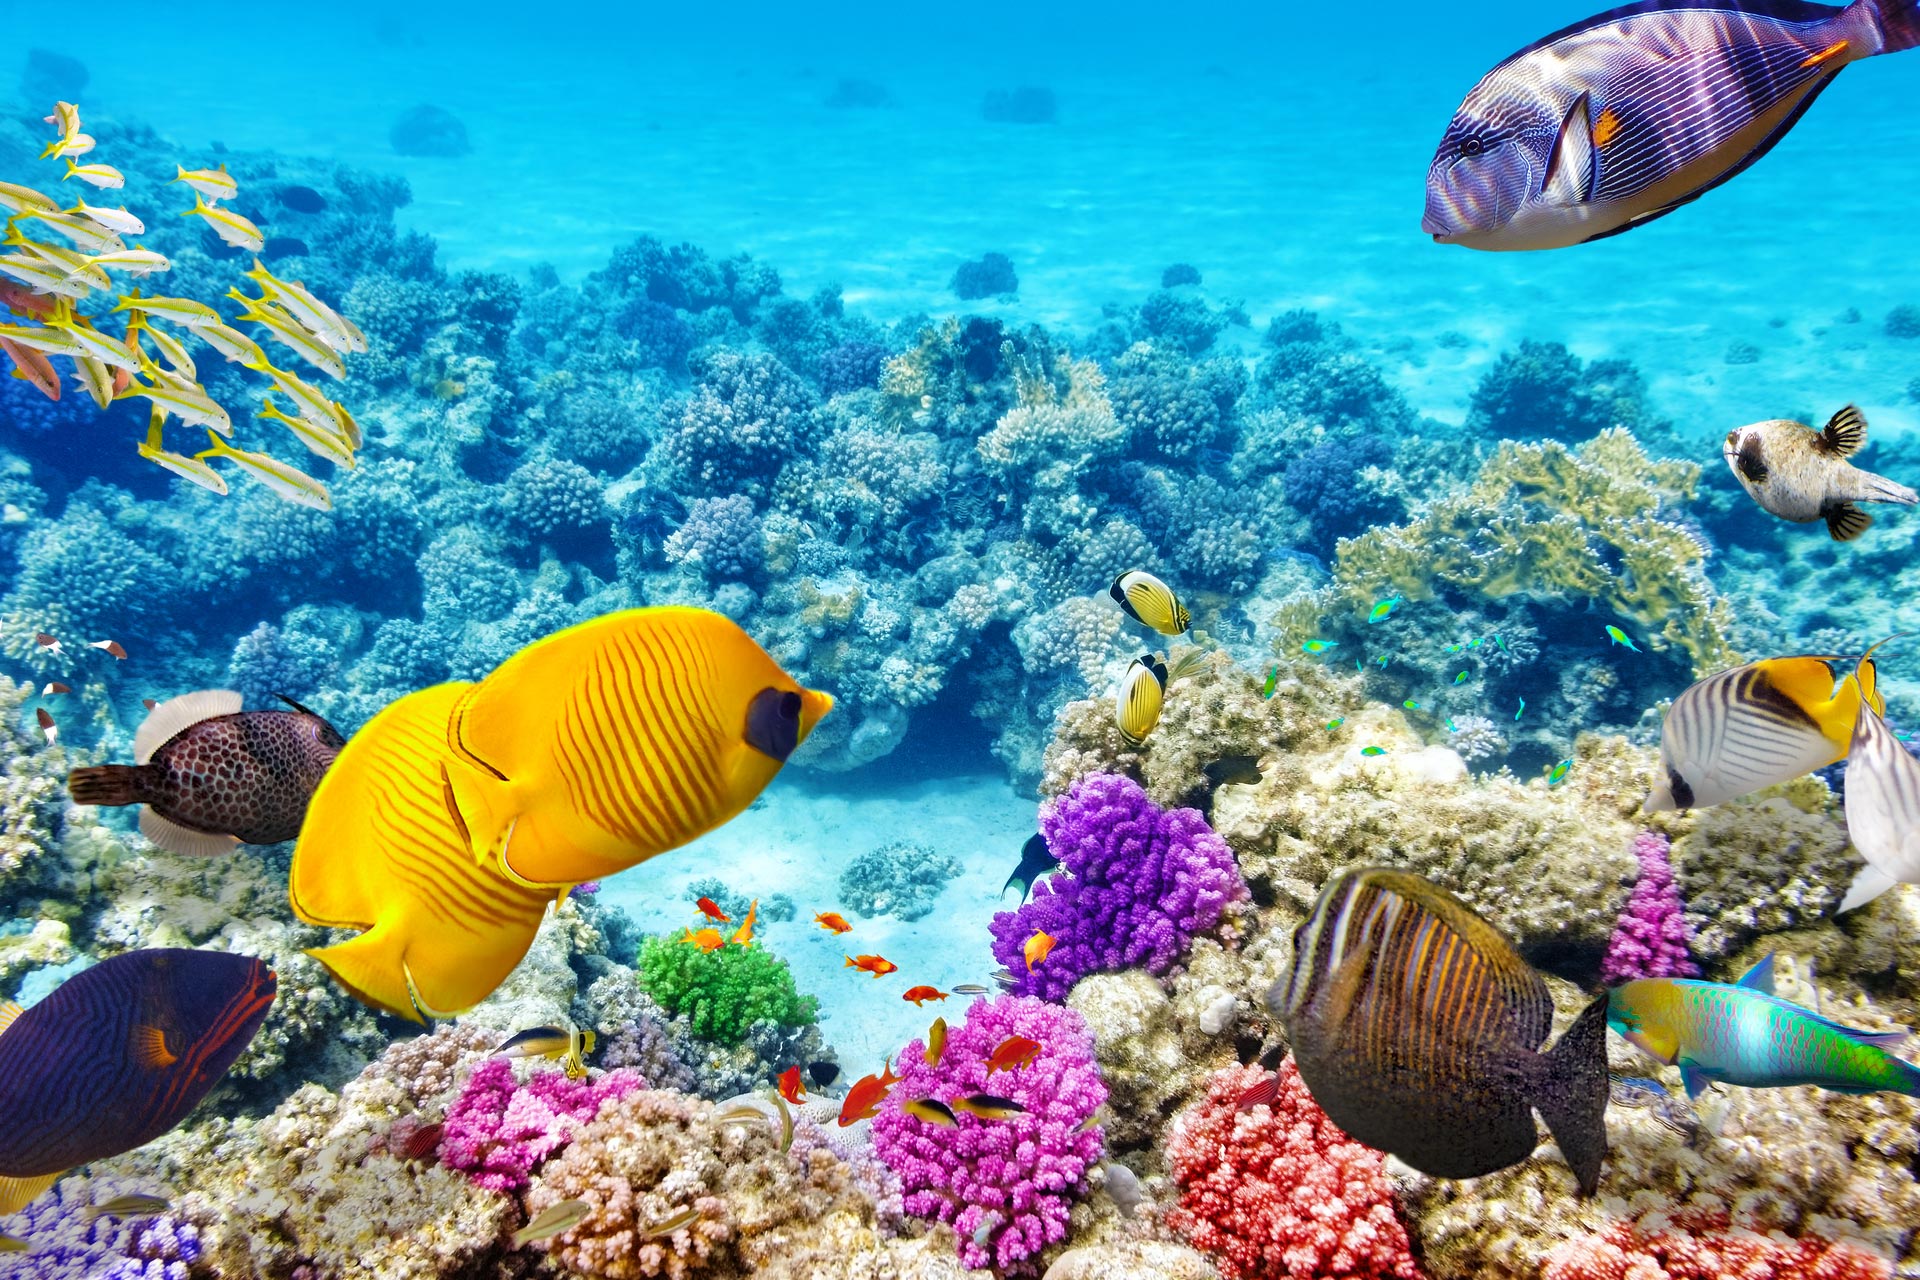 Great Barrier Reef Australia. Top 10 Most Beautiful Places in the World to Visit - 9